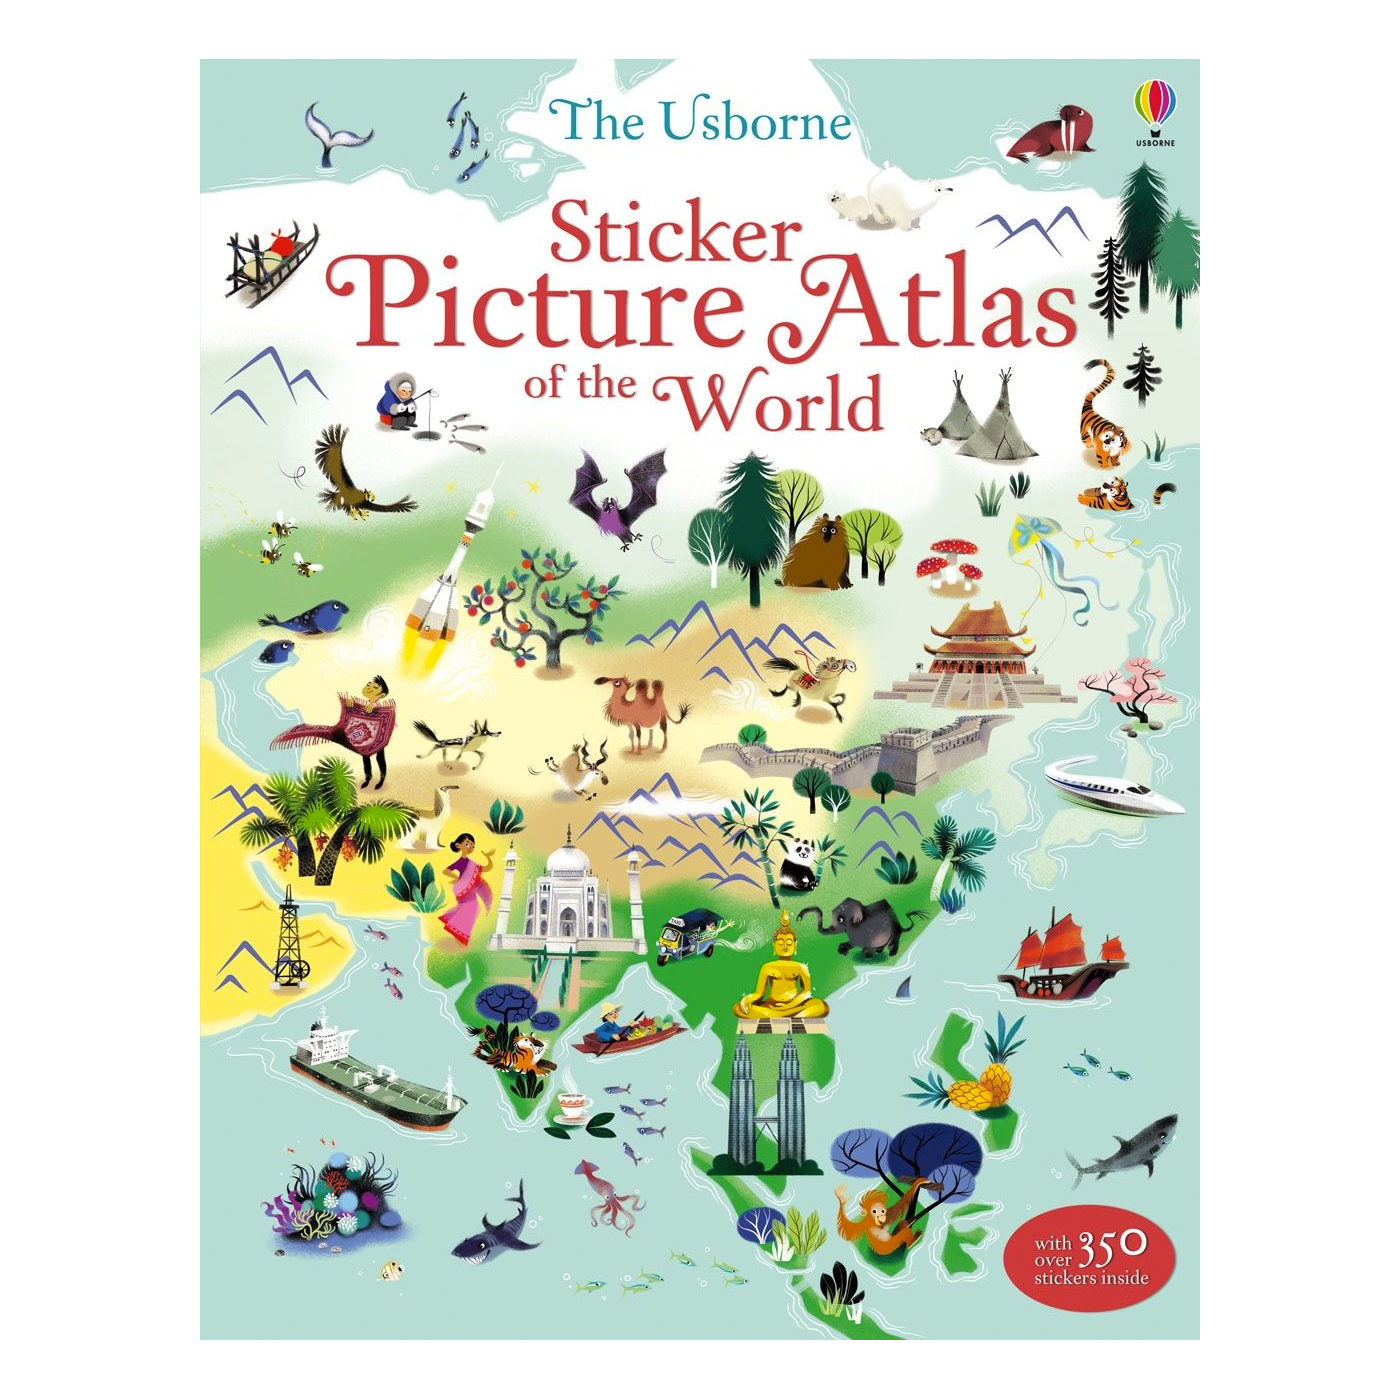  Sticker Picture of the Atlas World